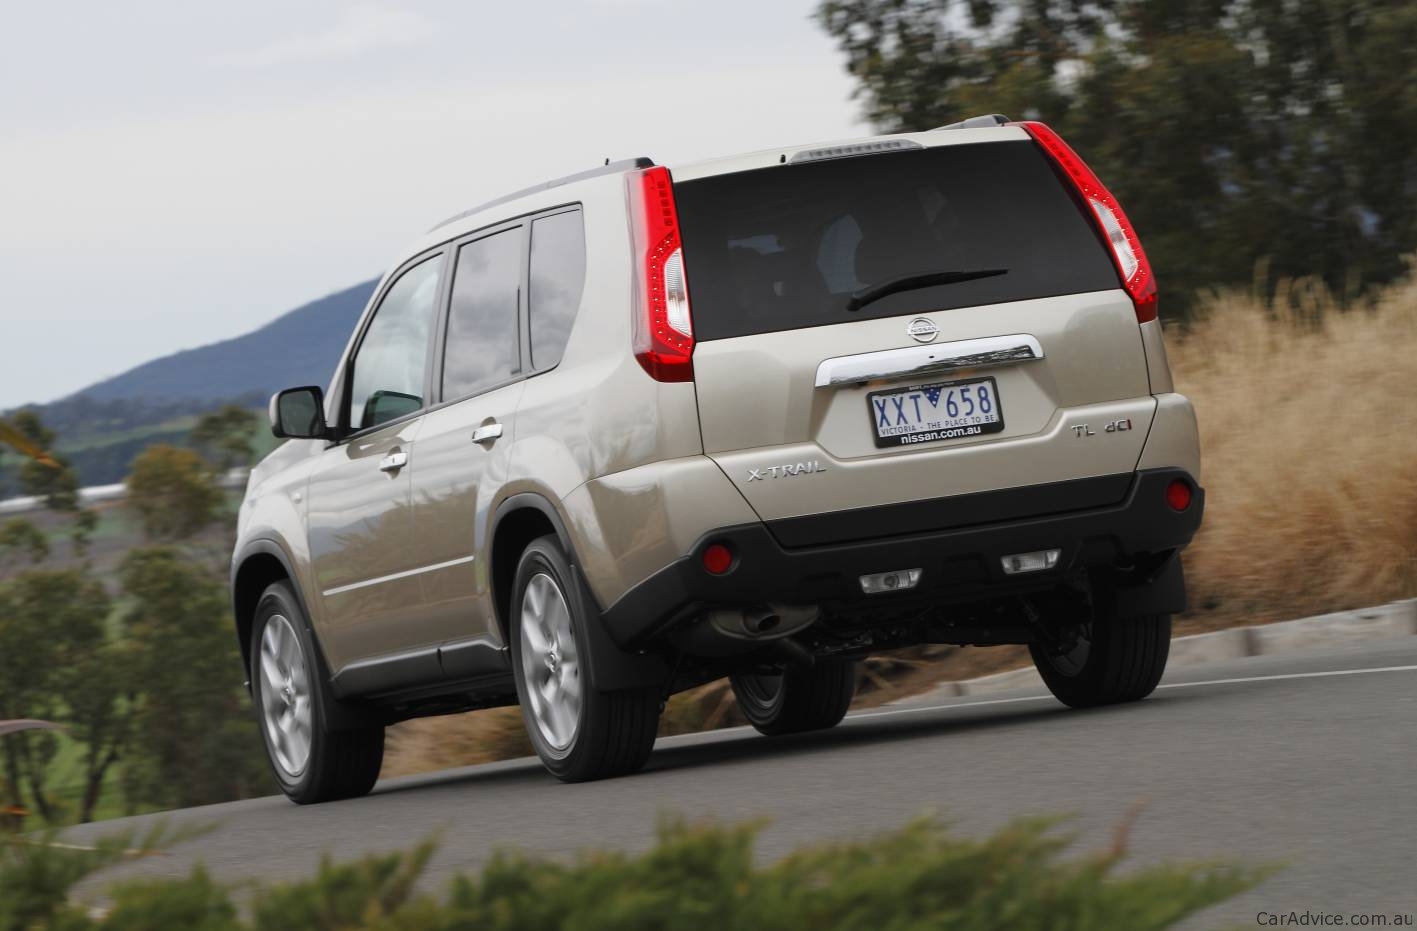 2010 Nissan XTrail update Photos (1 of 5)